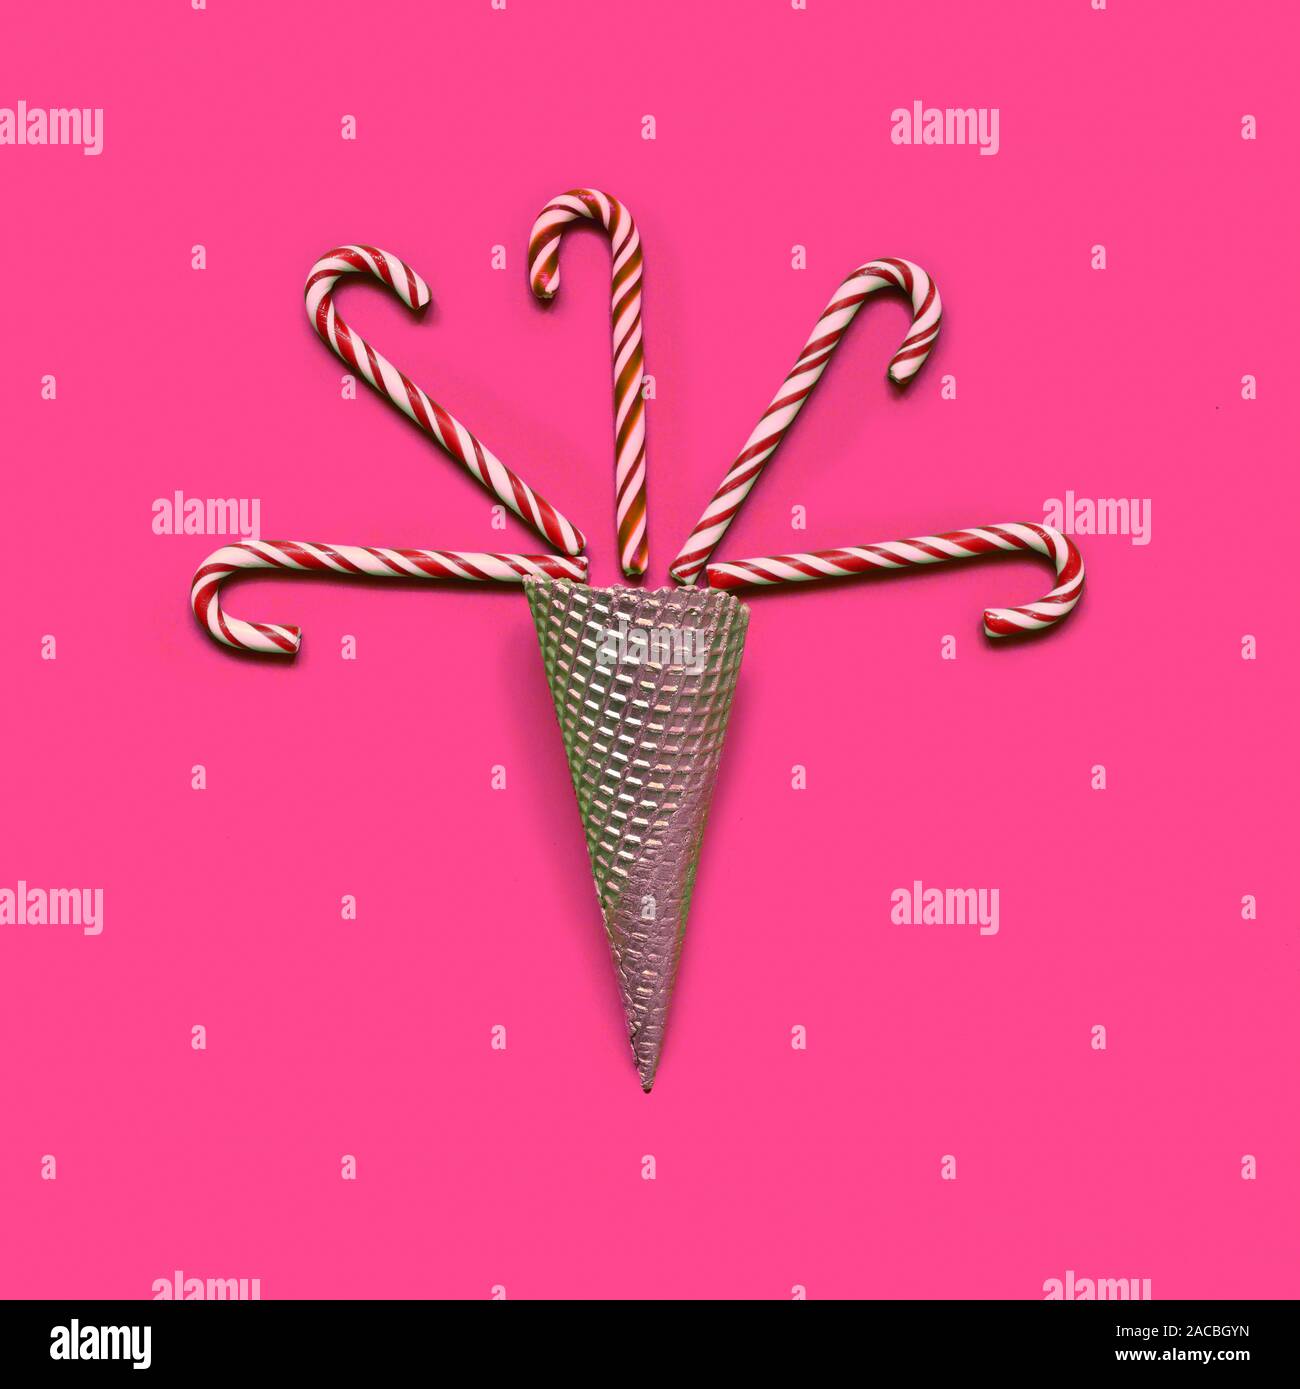 Creative minimal christmas art.Christmas candy canes in Ice Cream Cone on plastic pink background Stock Photo